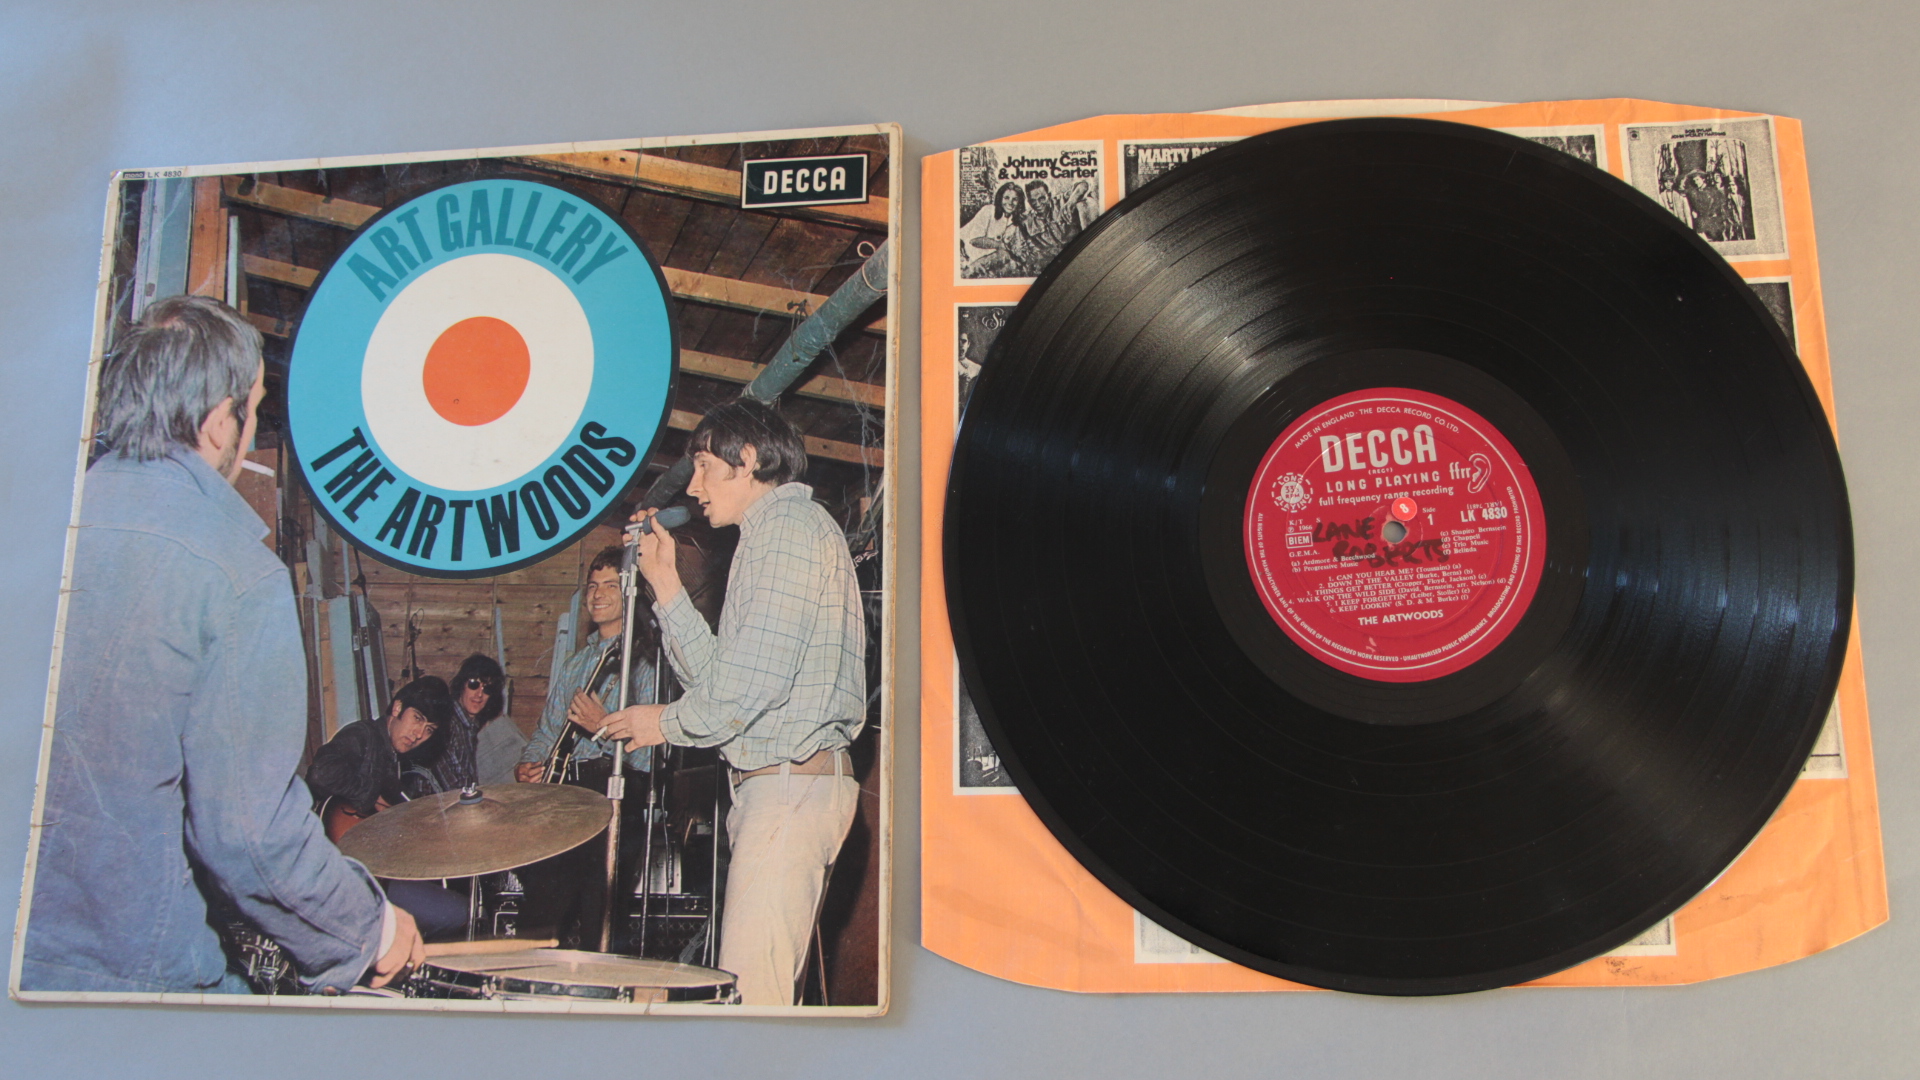 Artwoods Art Gallery 1966 DECCA LK 4830 LP red/ silver label with unboxed Decca and 'FFrr' laminated